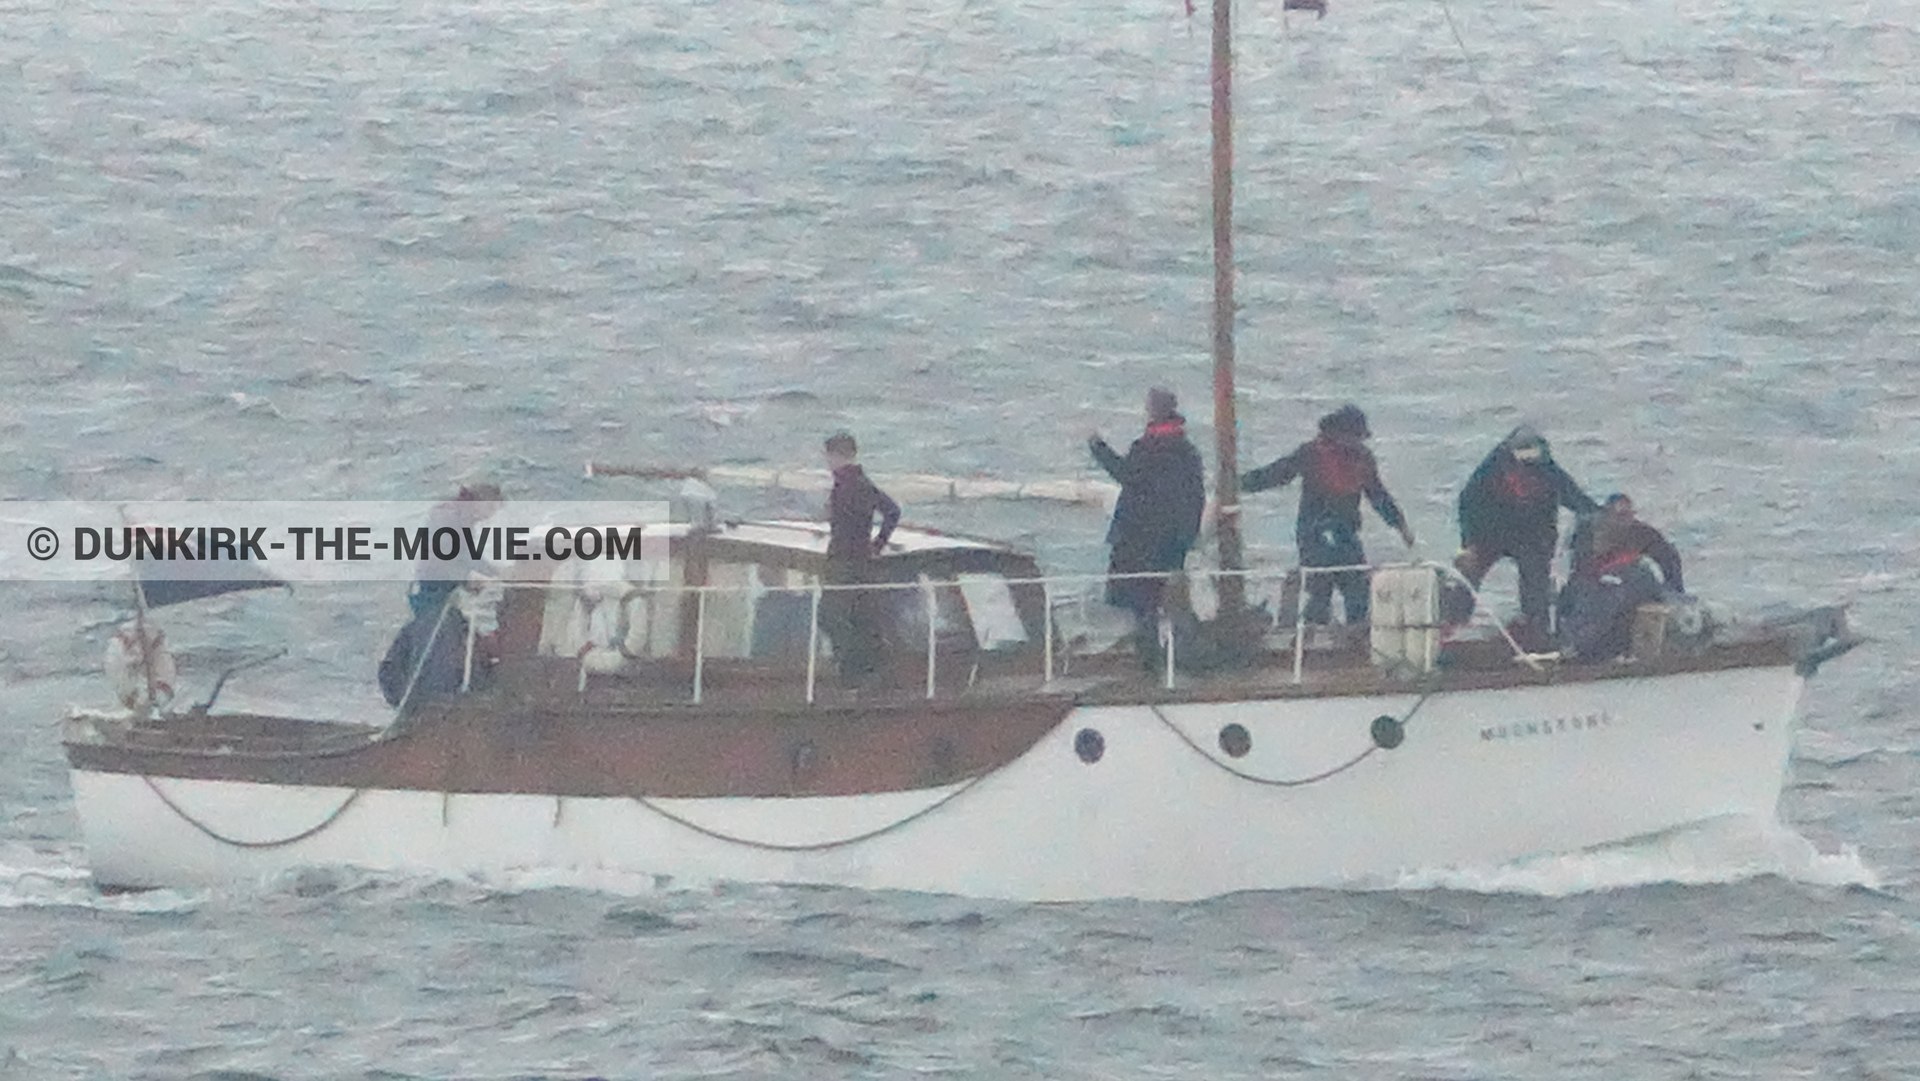 Picture with boat, Christopher Nolan, Moonstone,  from behind the scene of the Dunkirk movie by Nolan